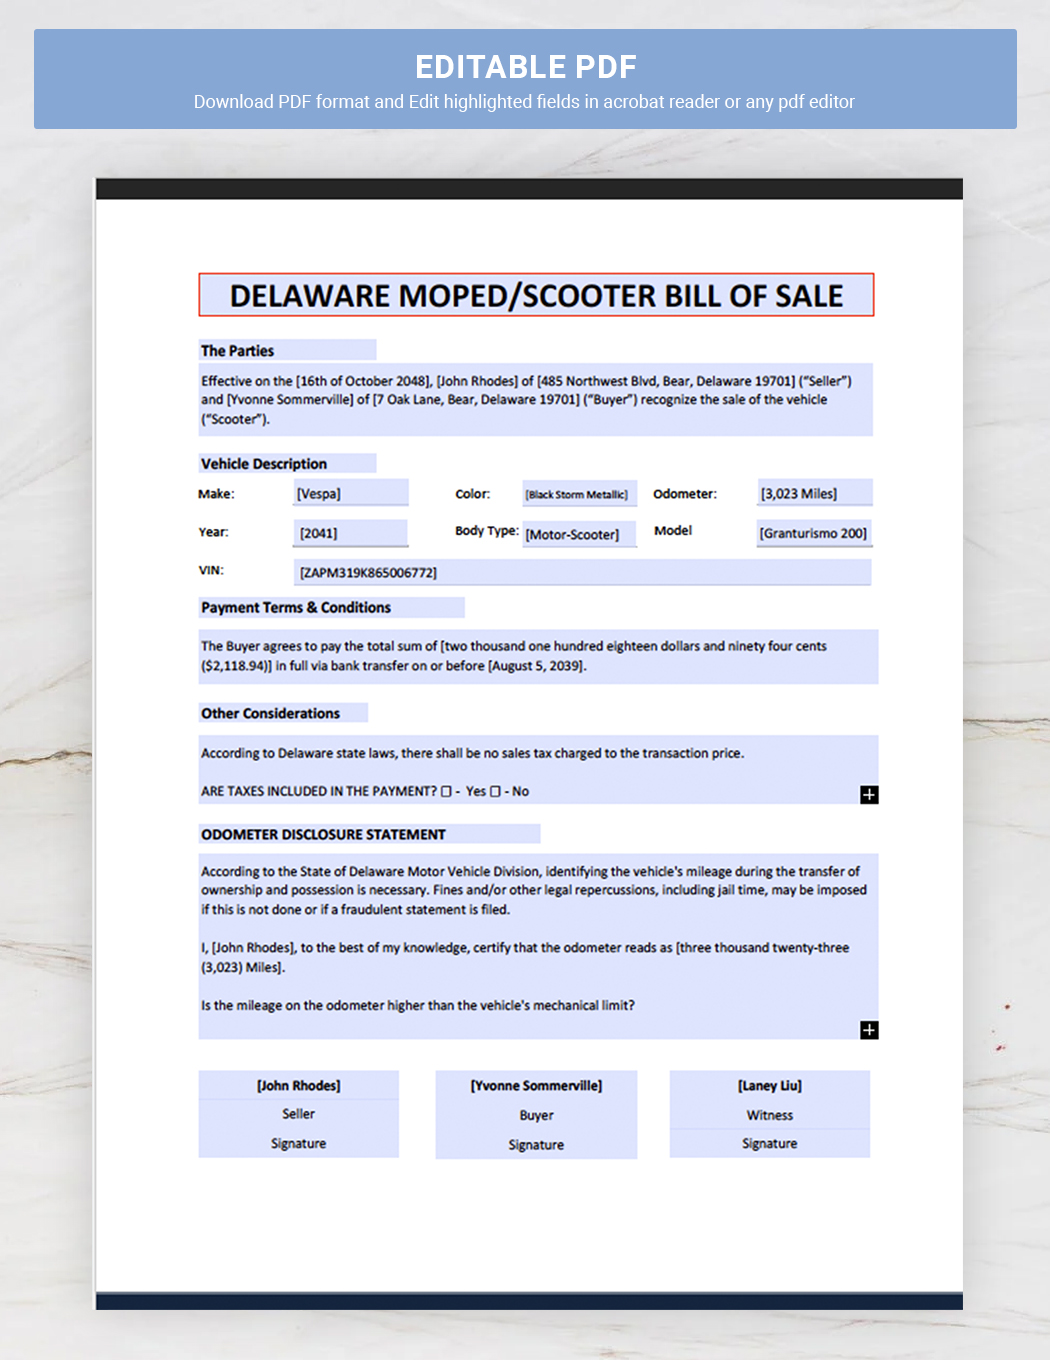 Delaware Moped / Scooter Bill of Sale Template